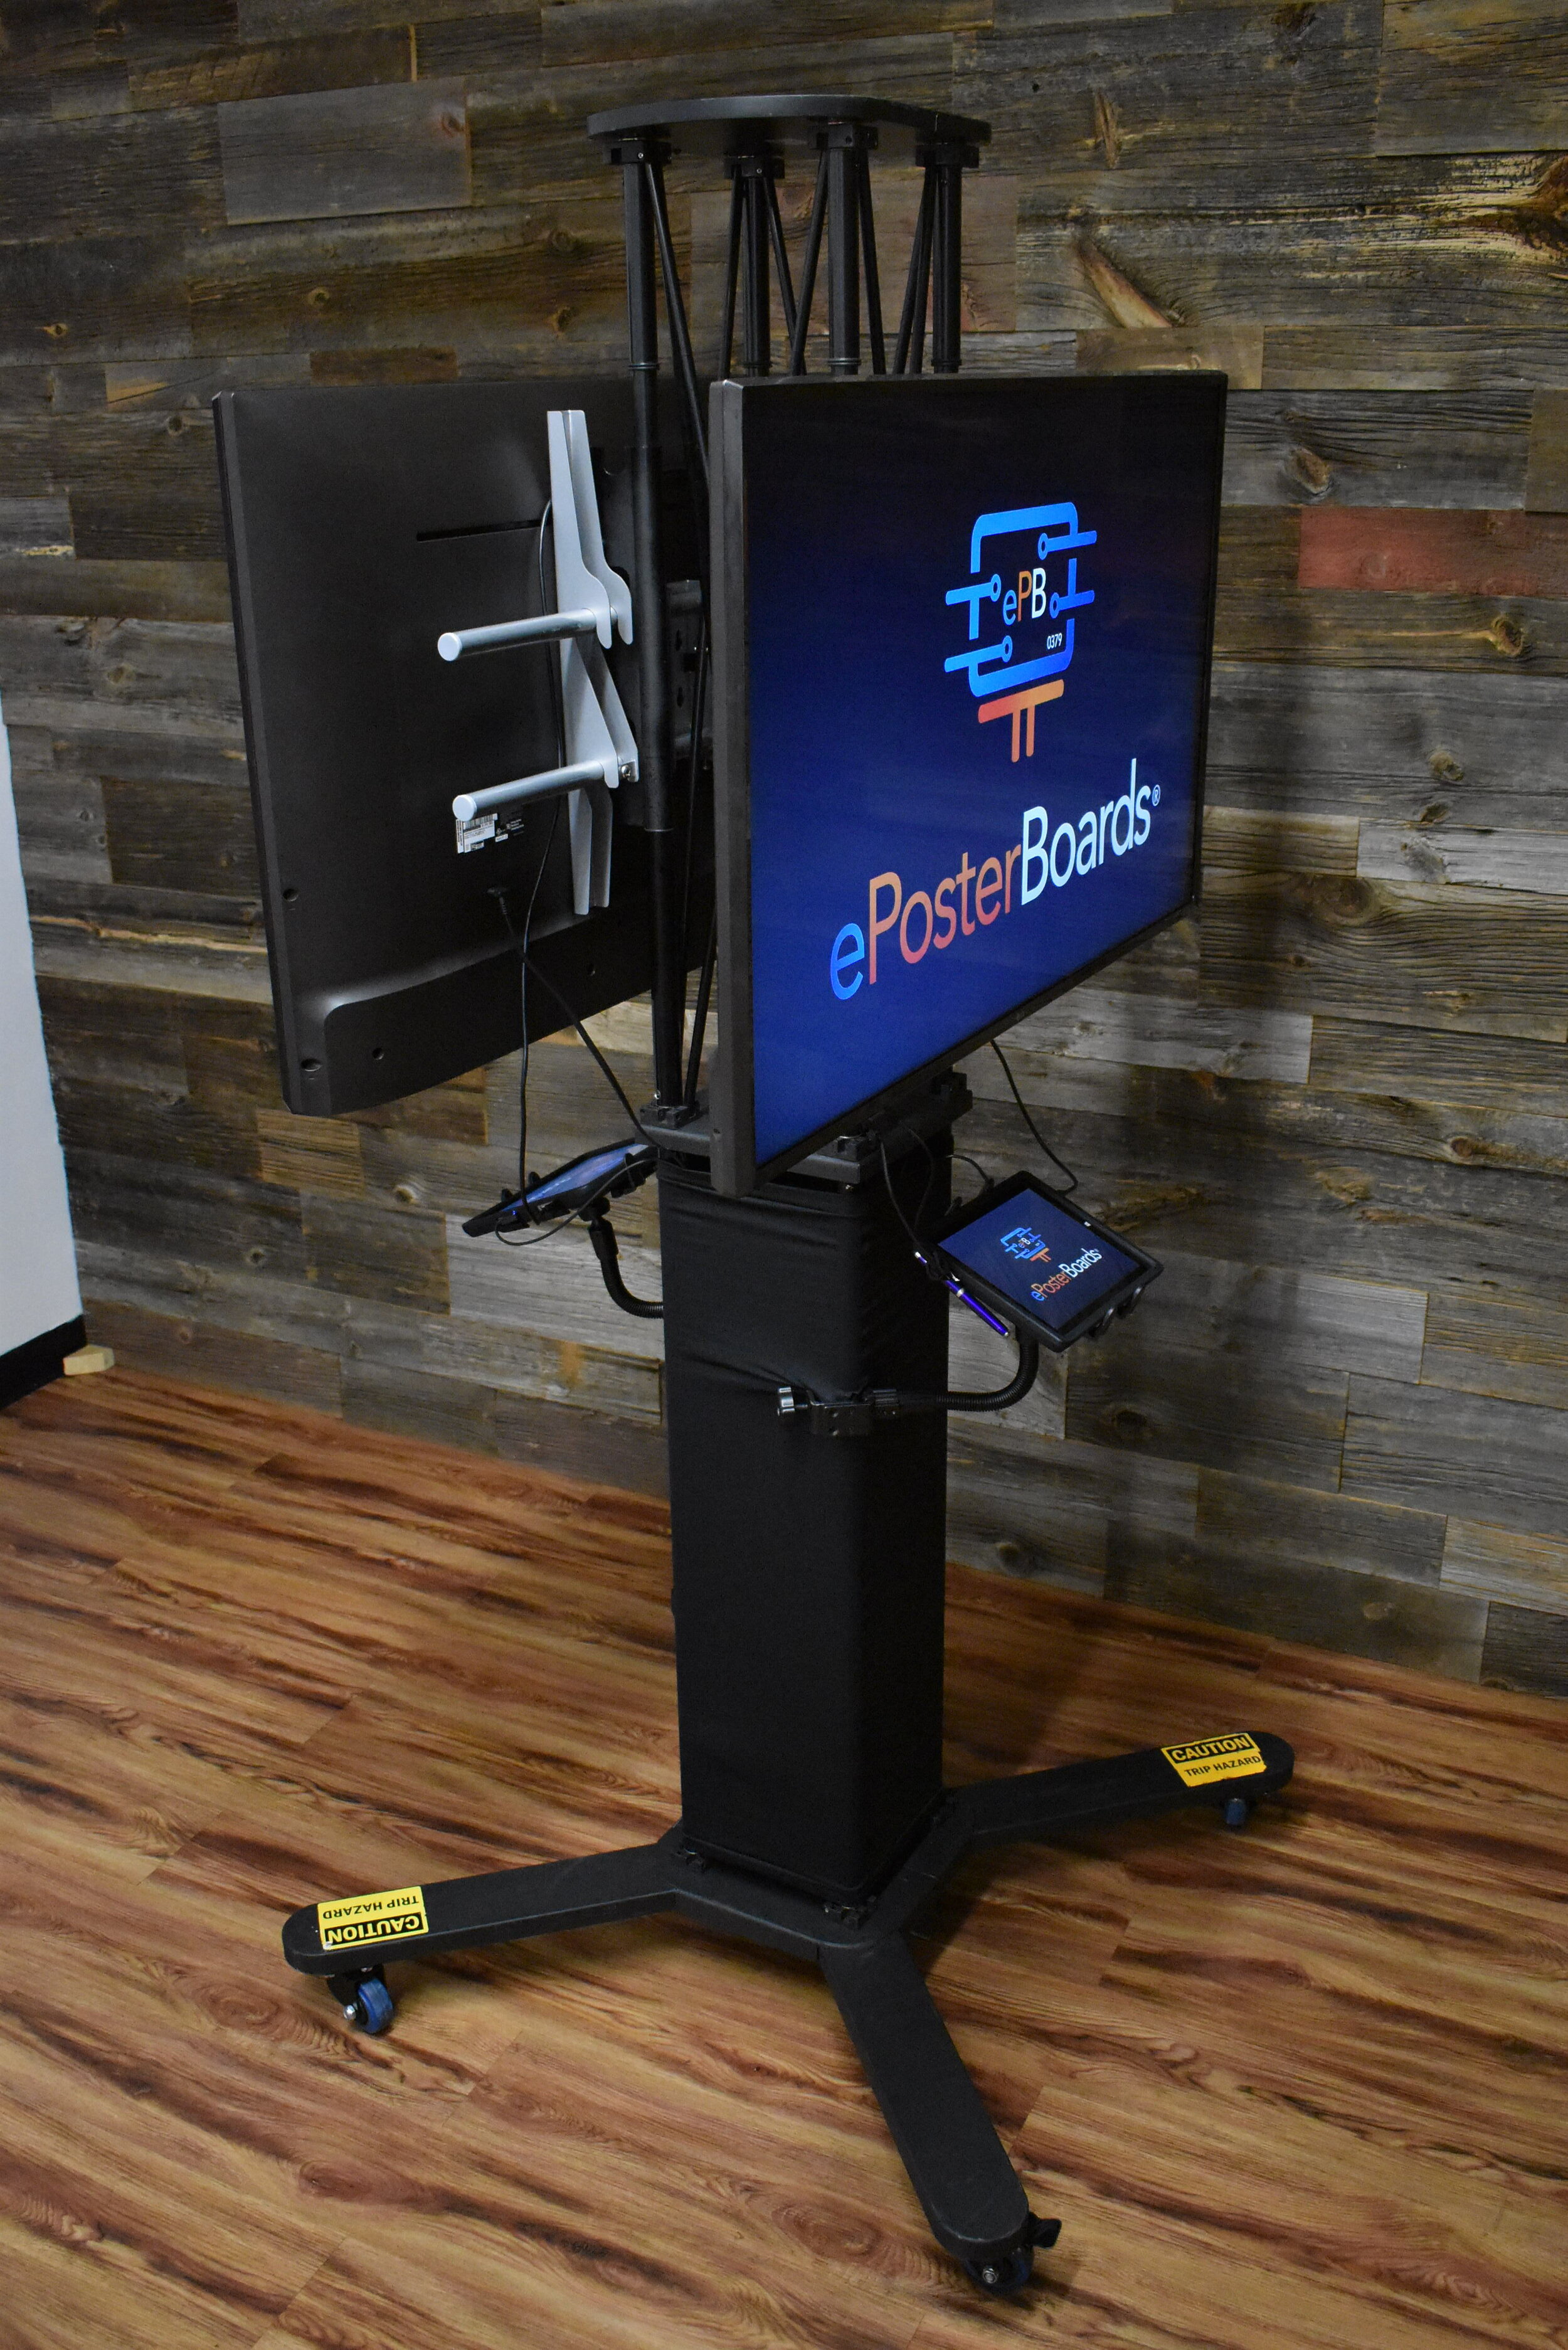 DOUBLE-SIDED STANDS: The guaranteed and standard display is a double-sided setup